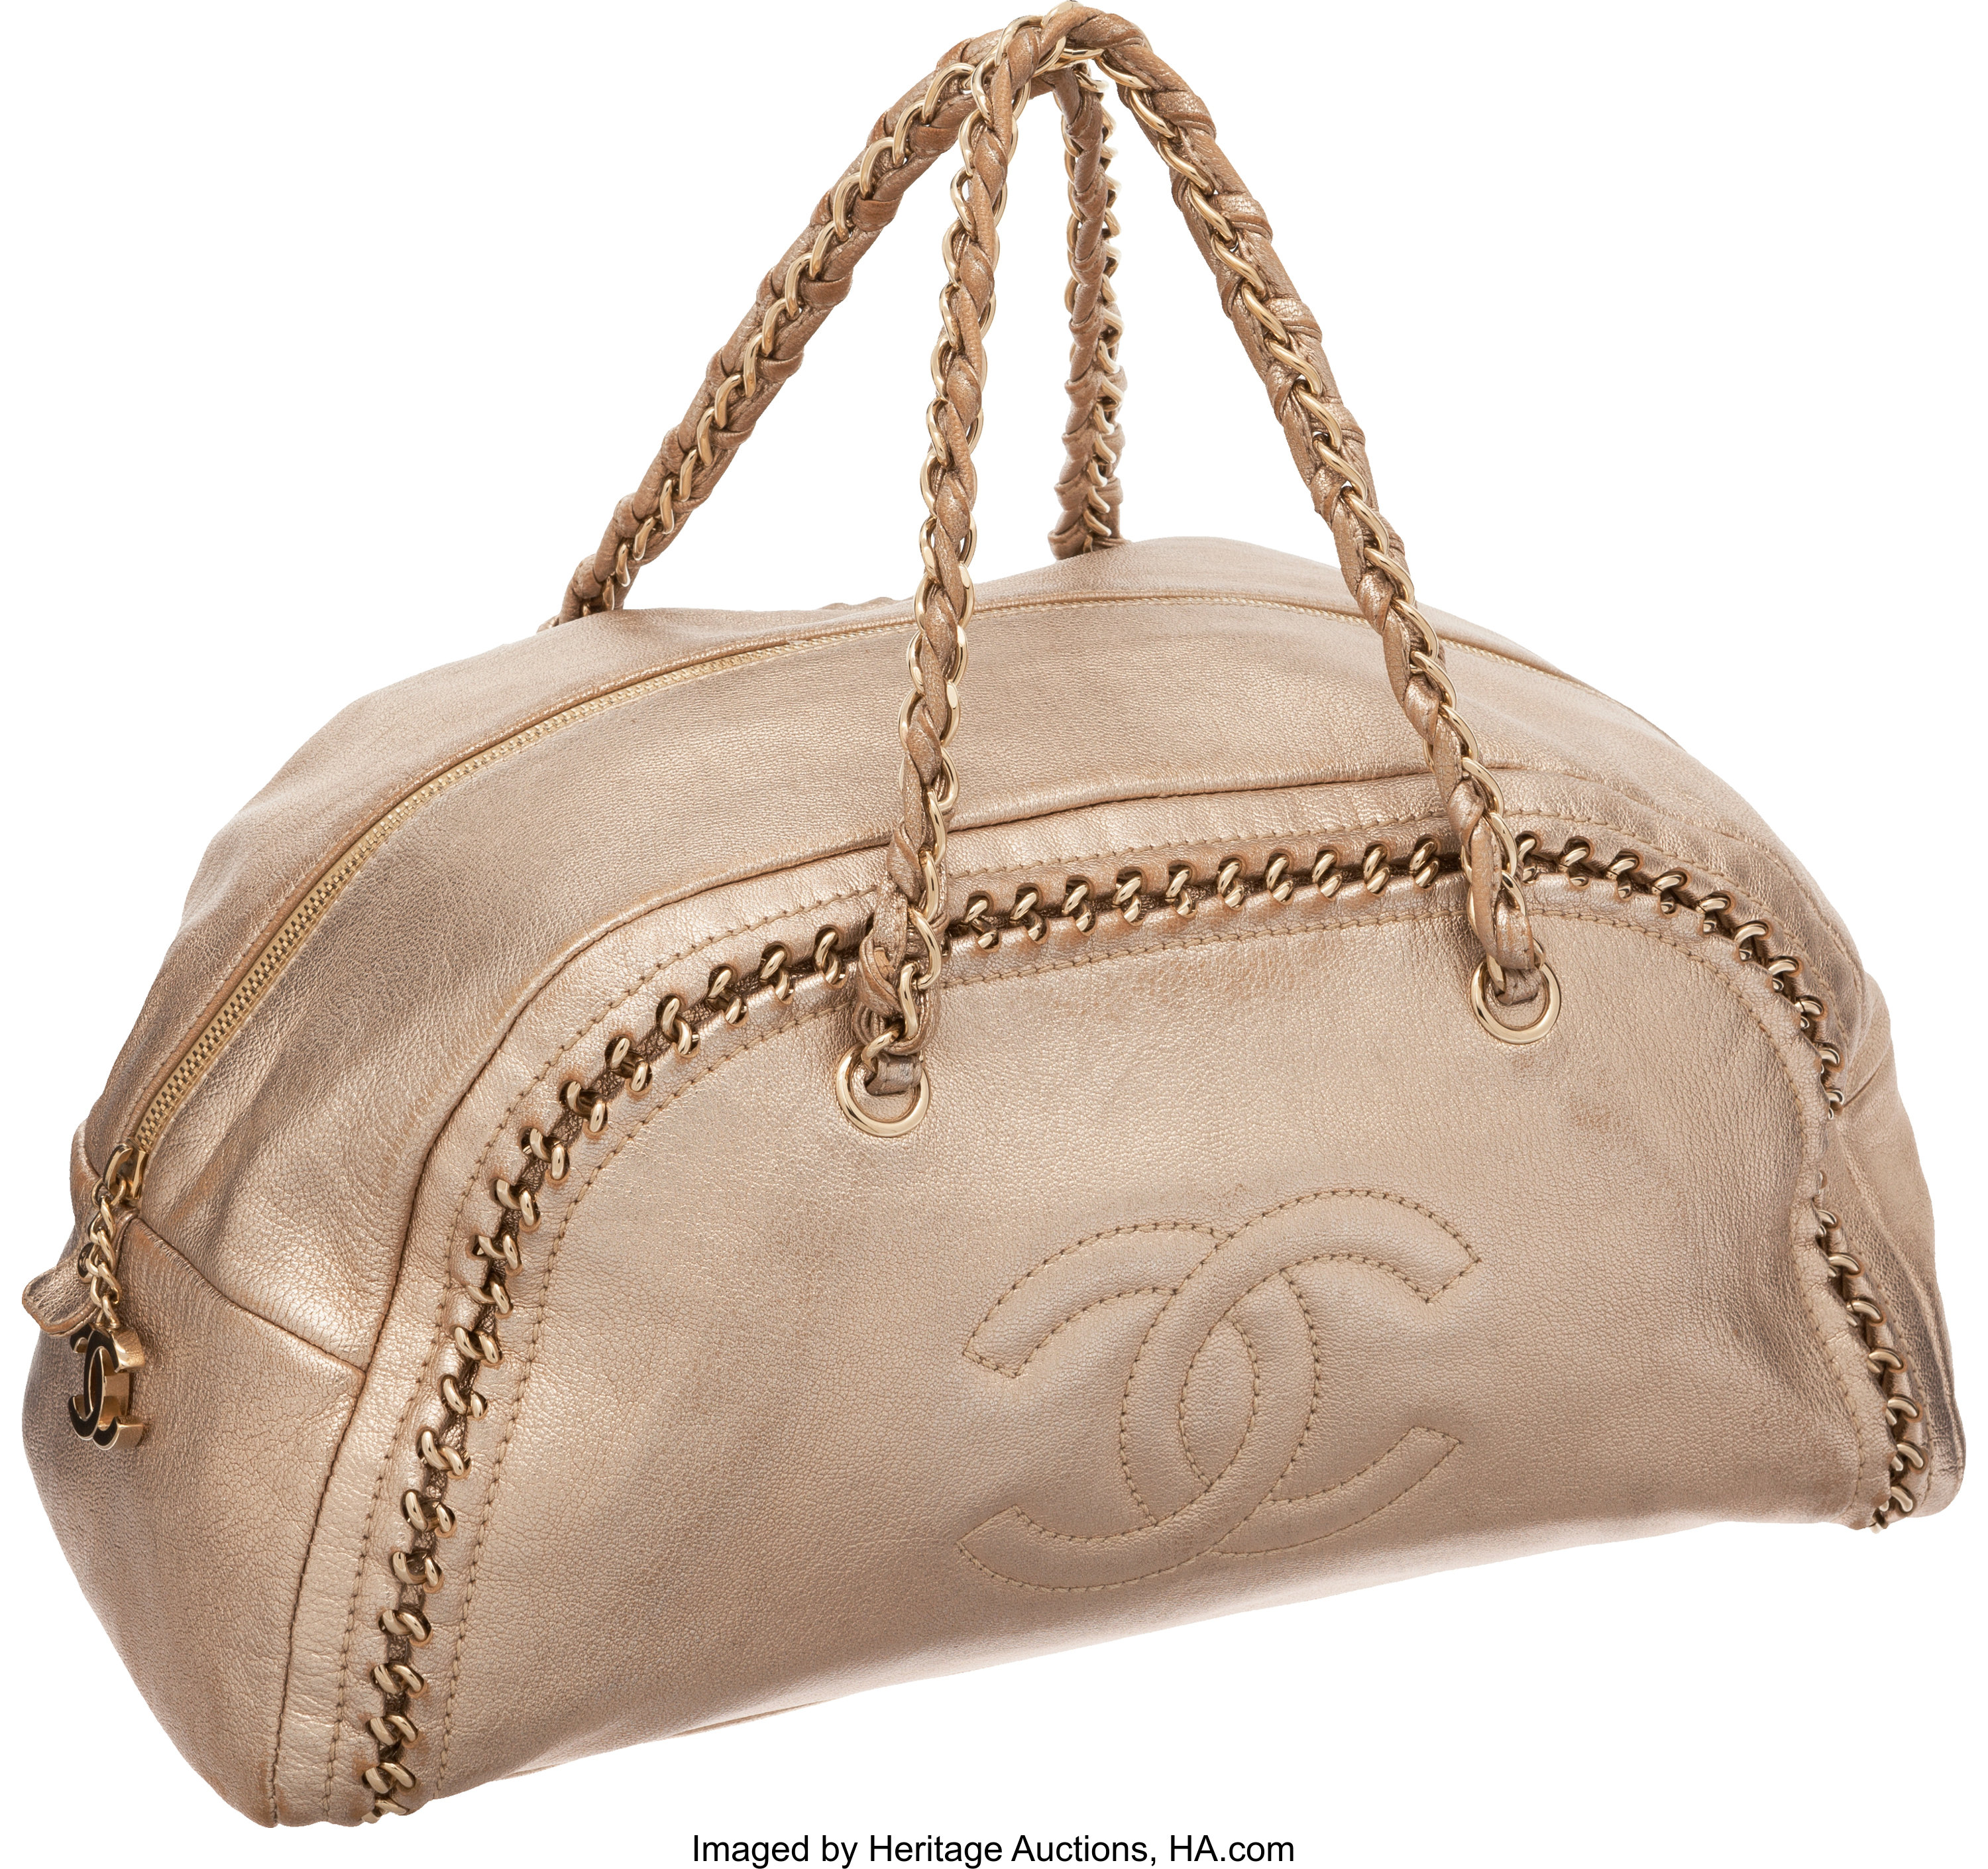 Bowling Bag Chanel Bags - Vestiaire Collective